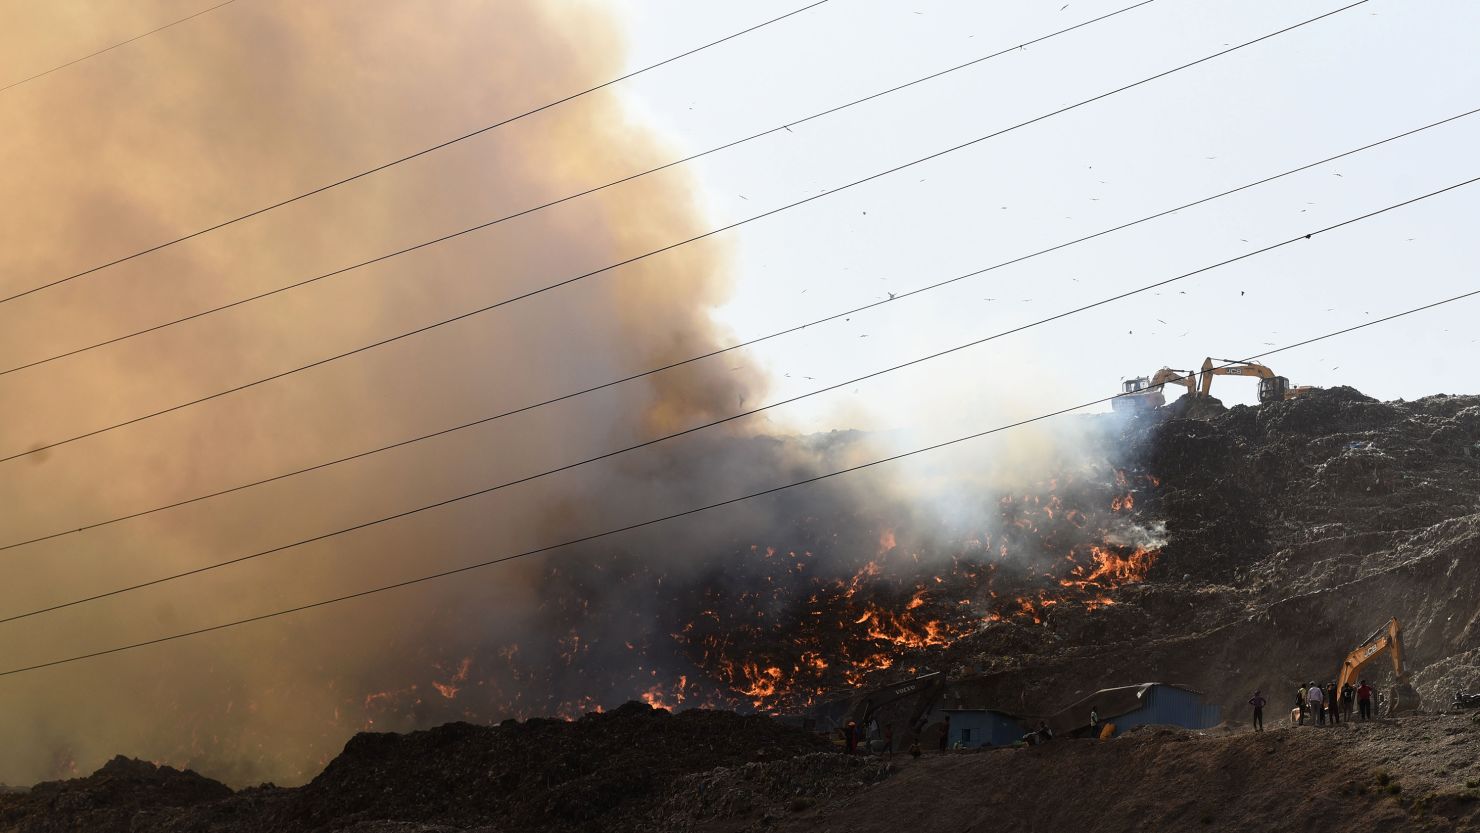 Firefighters battle the blaze at the Ghazipur landfill on March 28, 2022 in New Delhi, India.